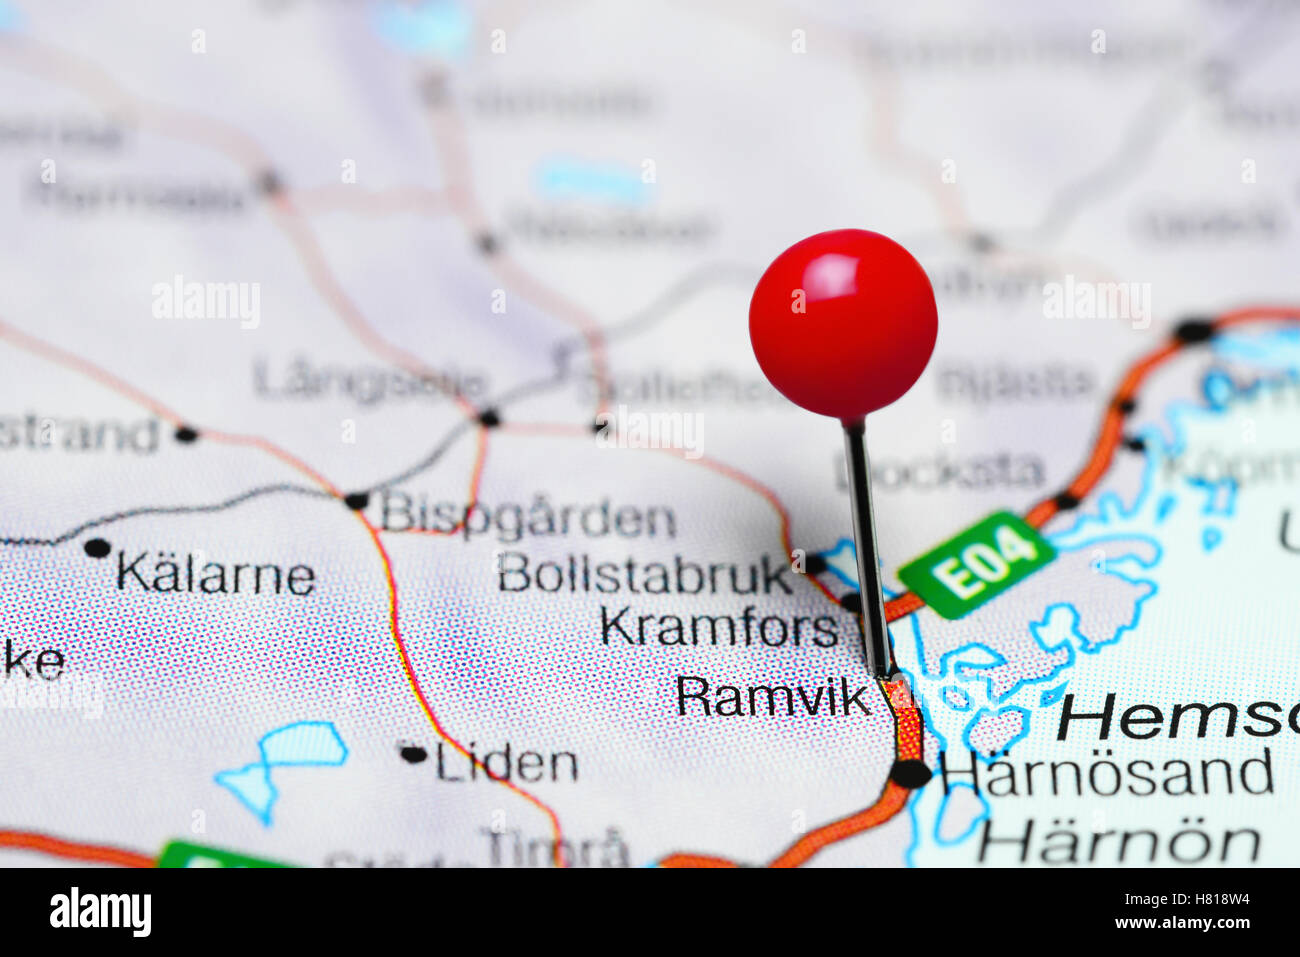 Ramvik pinned on a map of Sweden Stock Photo